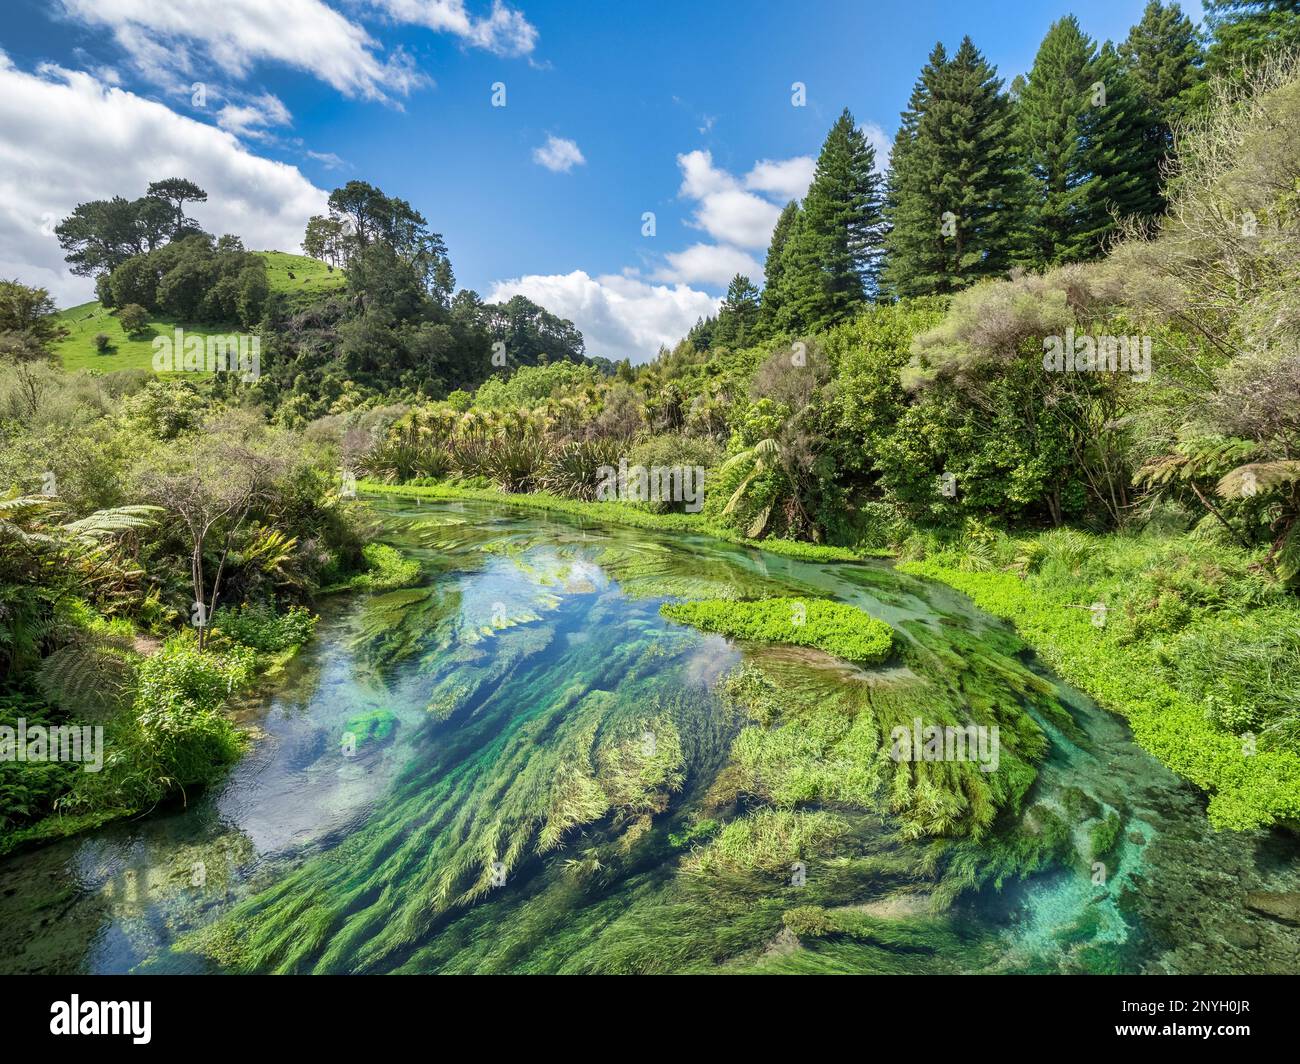 The Blue Spring area of the Waihou River in the Waikato Region of the North Island of New Zealand Stock Photo